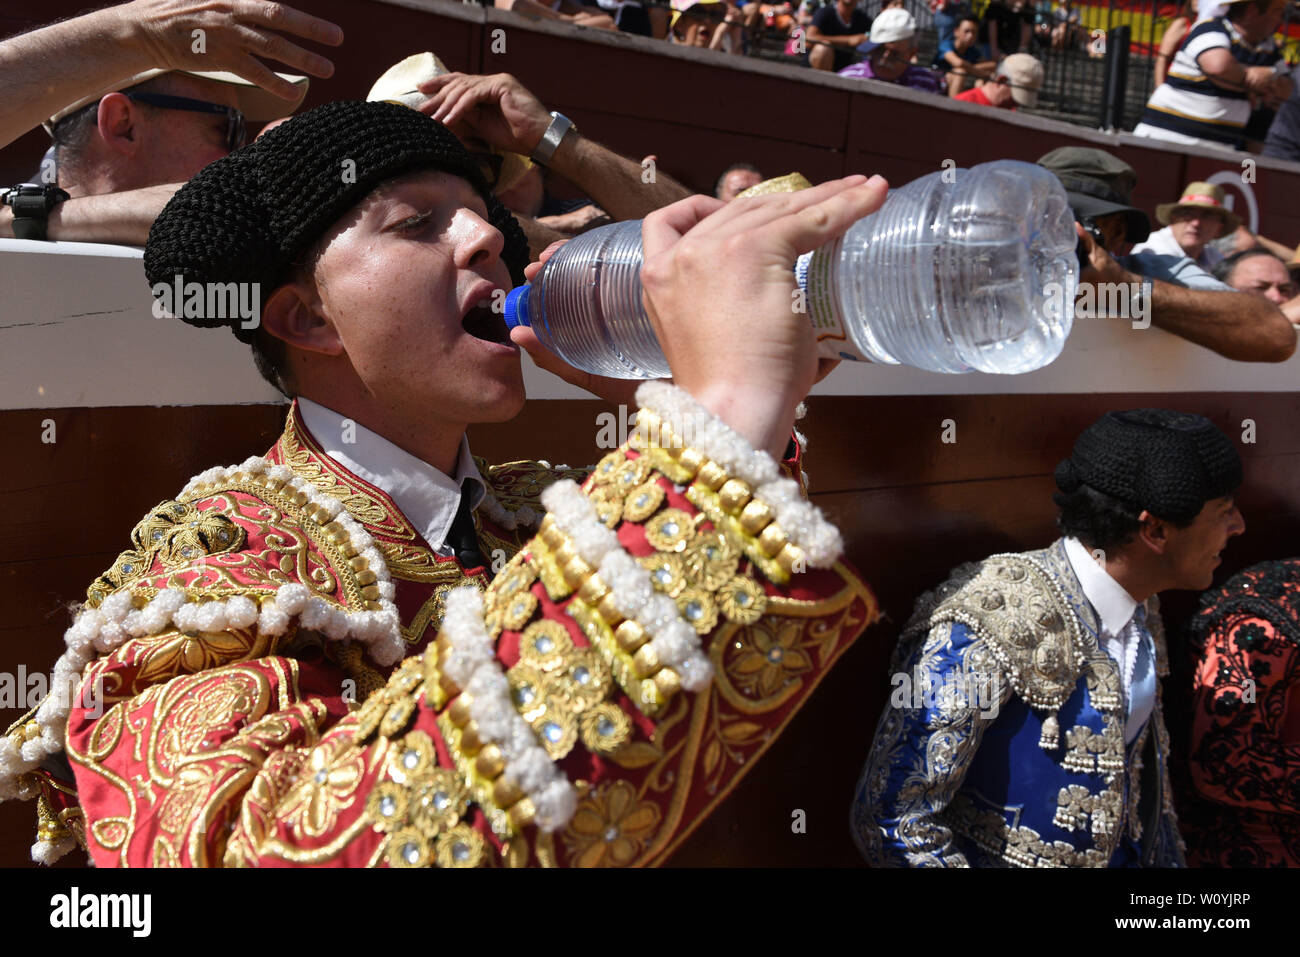 A Spanish bullfighter drinks water as temperatures reached 36º degrees Celsius during the Viernes de Toros Celebration in Soria.The first heat wave of summer, which has claimed lives continues in Spain. Spanish's weather agency AEMET forecasts show today is set to be the worst day for severe hot weather with temperatures up to 42C in several regions. Stock Photo